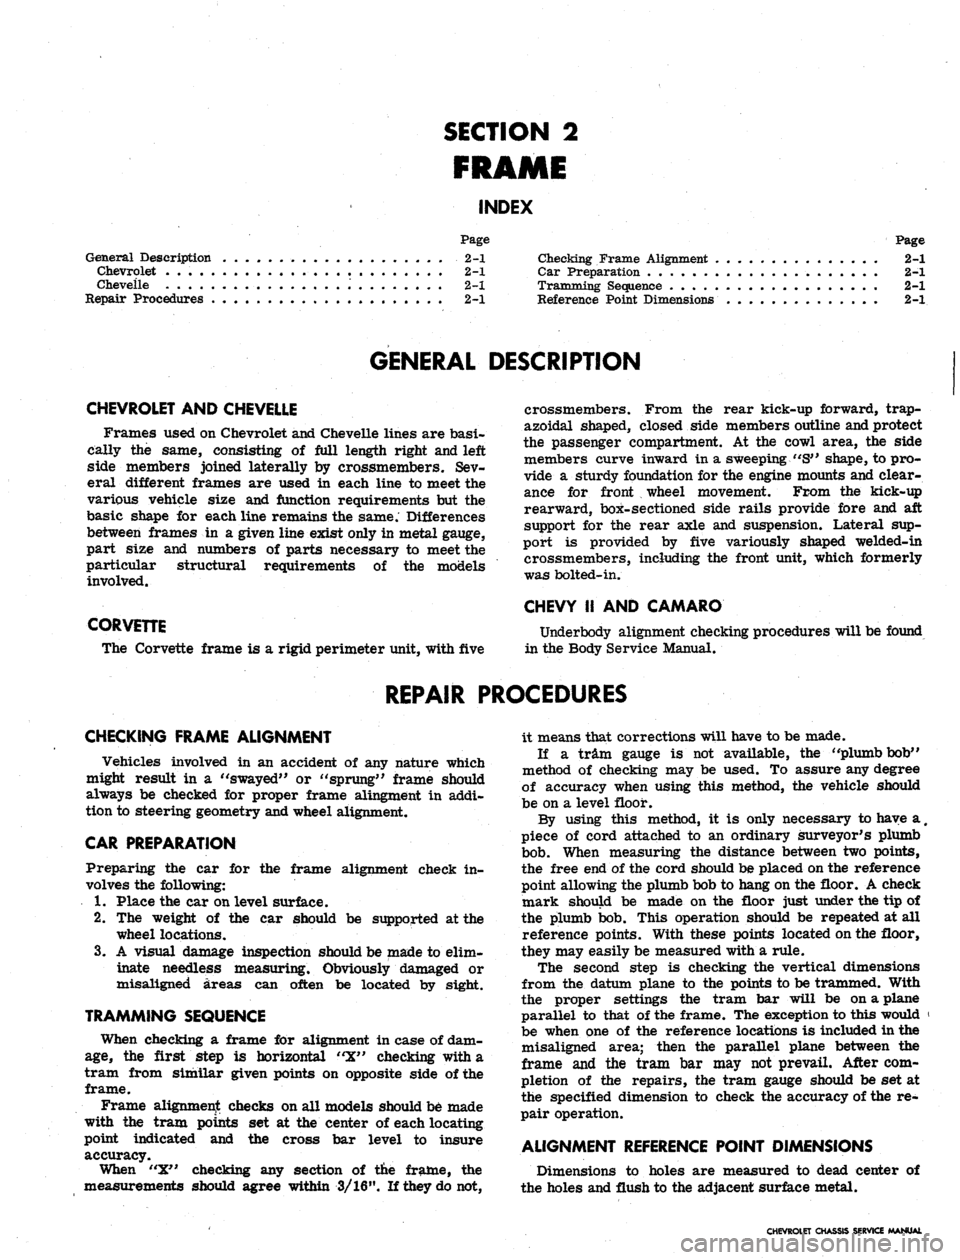 CHEVROLET CAMARO 1967 1.G Chassis Repair Manual 
SECTION 2

FRAME

INDEX

Page

General Description 2-1

Chevrolet 2-1

Cheveile . 2-1

Repair Procedures 2-1 
Page

Checking Frame Alignment 2-1

Car Preparation 2-1

Tramming Sequence 2-1

Referenc